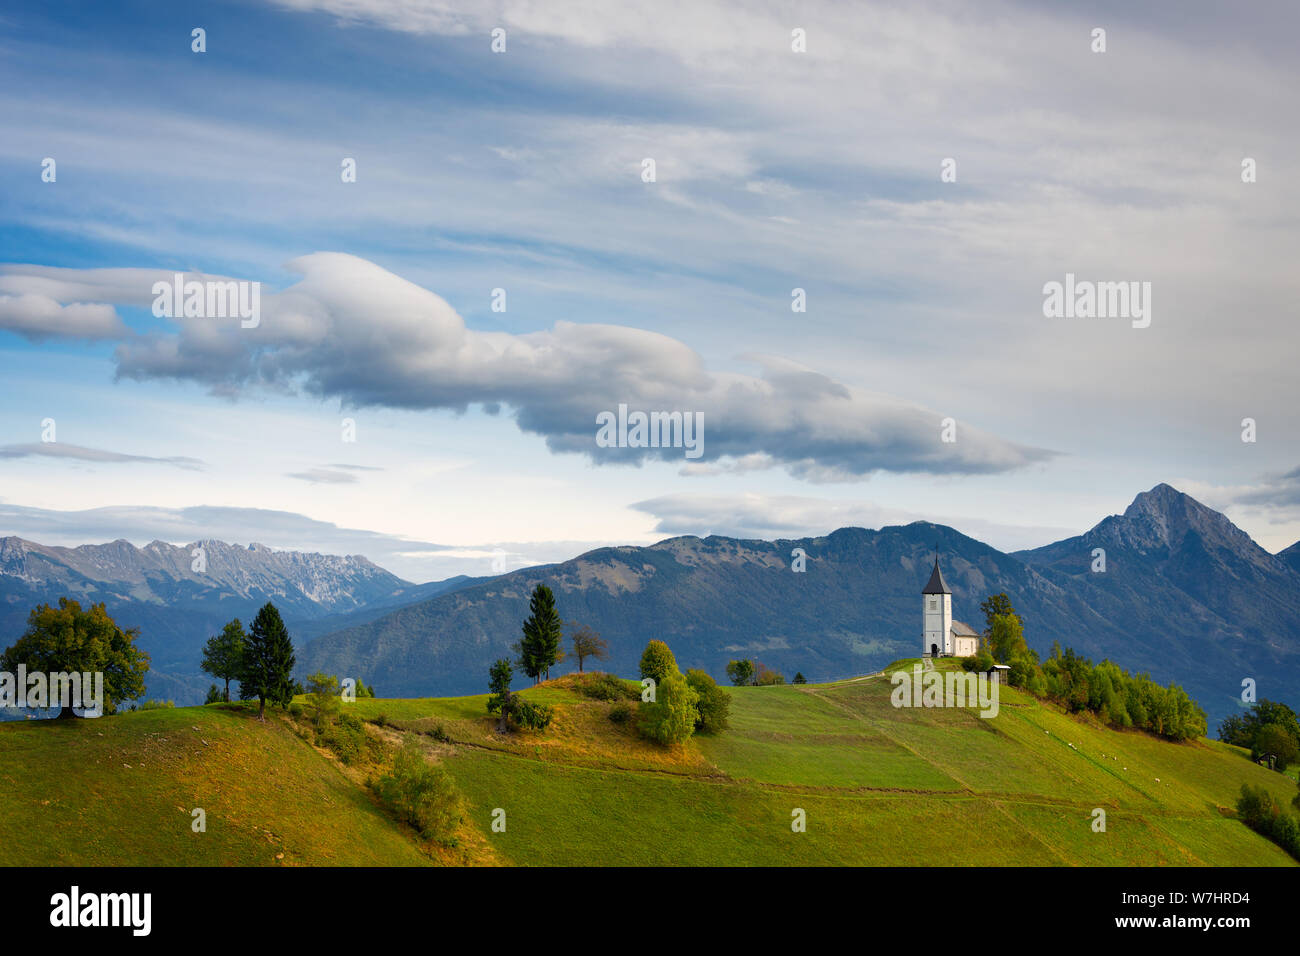 The church of St. Primus on the top of a hill in a landscape with the Kamnik Alps in the background under strange clouds in Jamnik, Kranj, Slovenia. Stock Photo